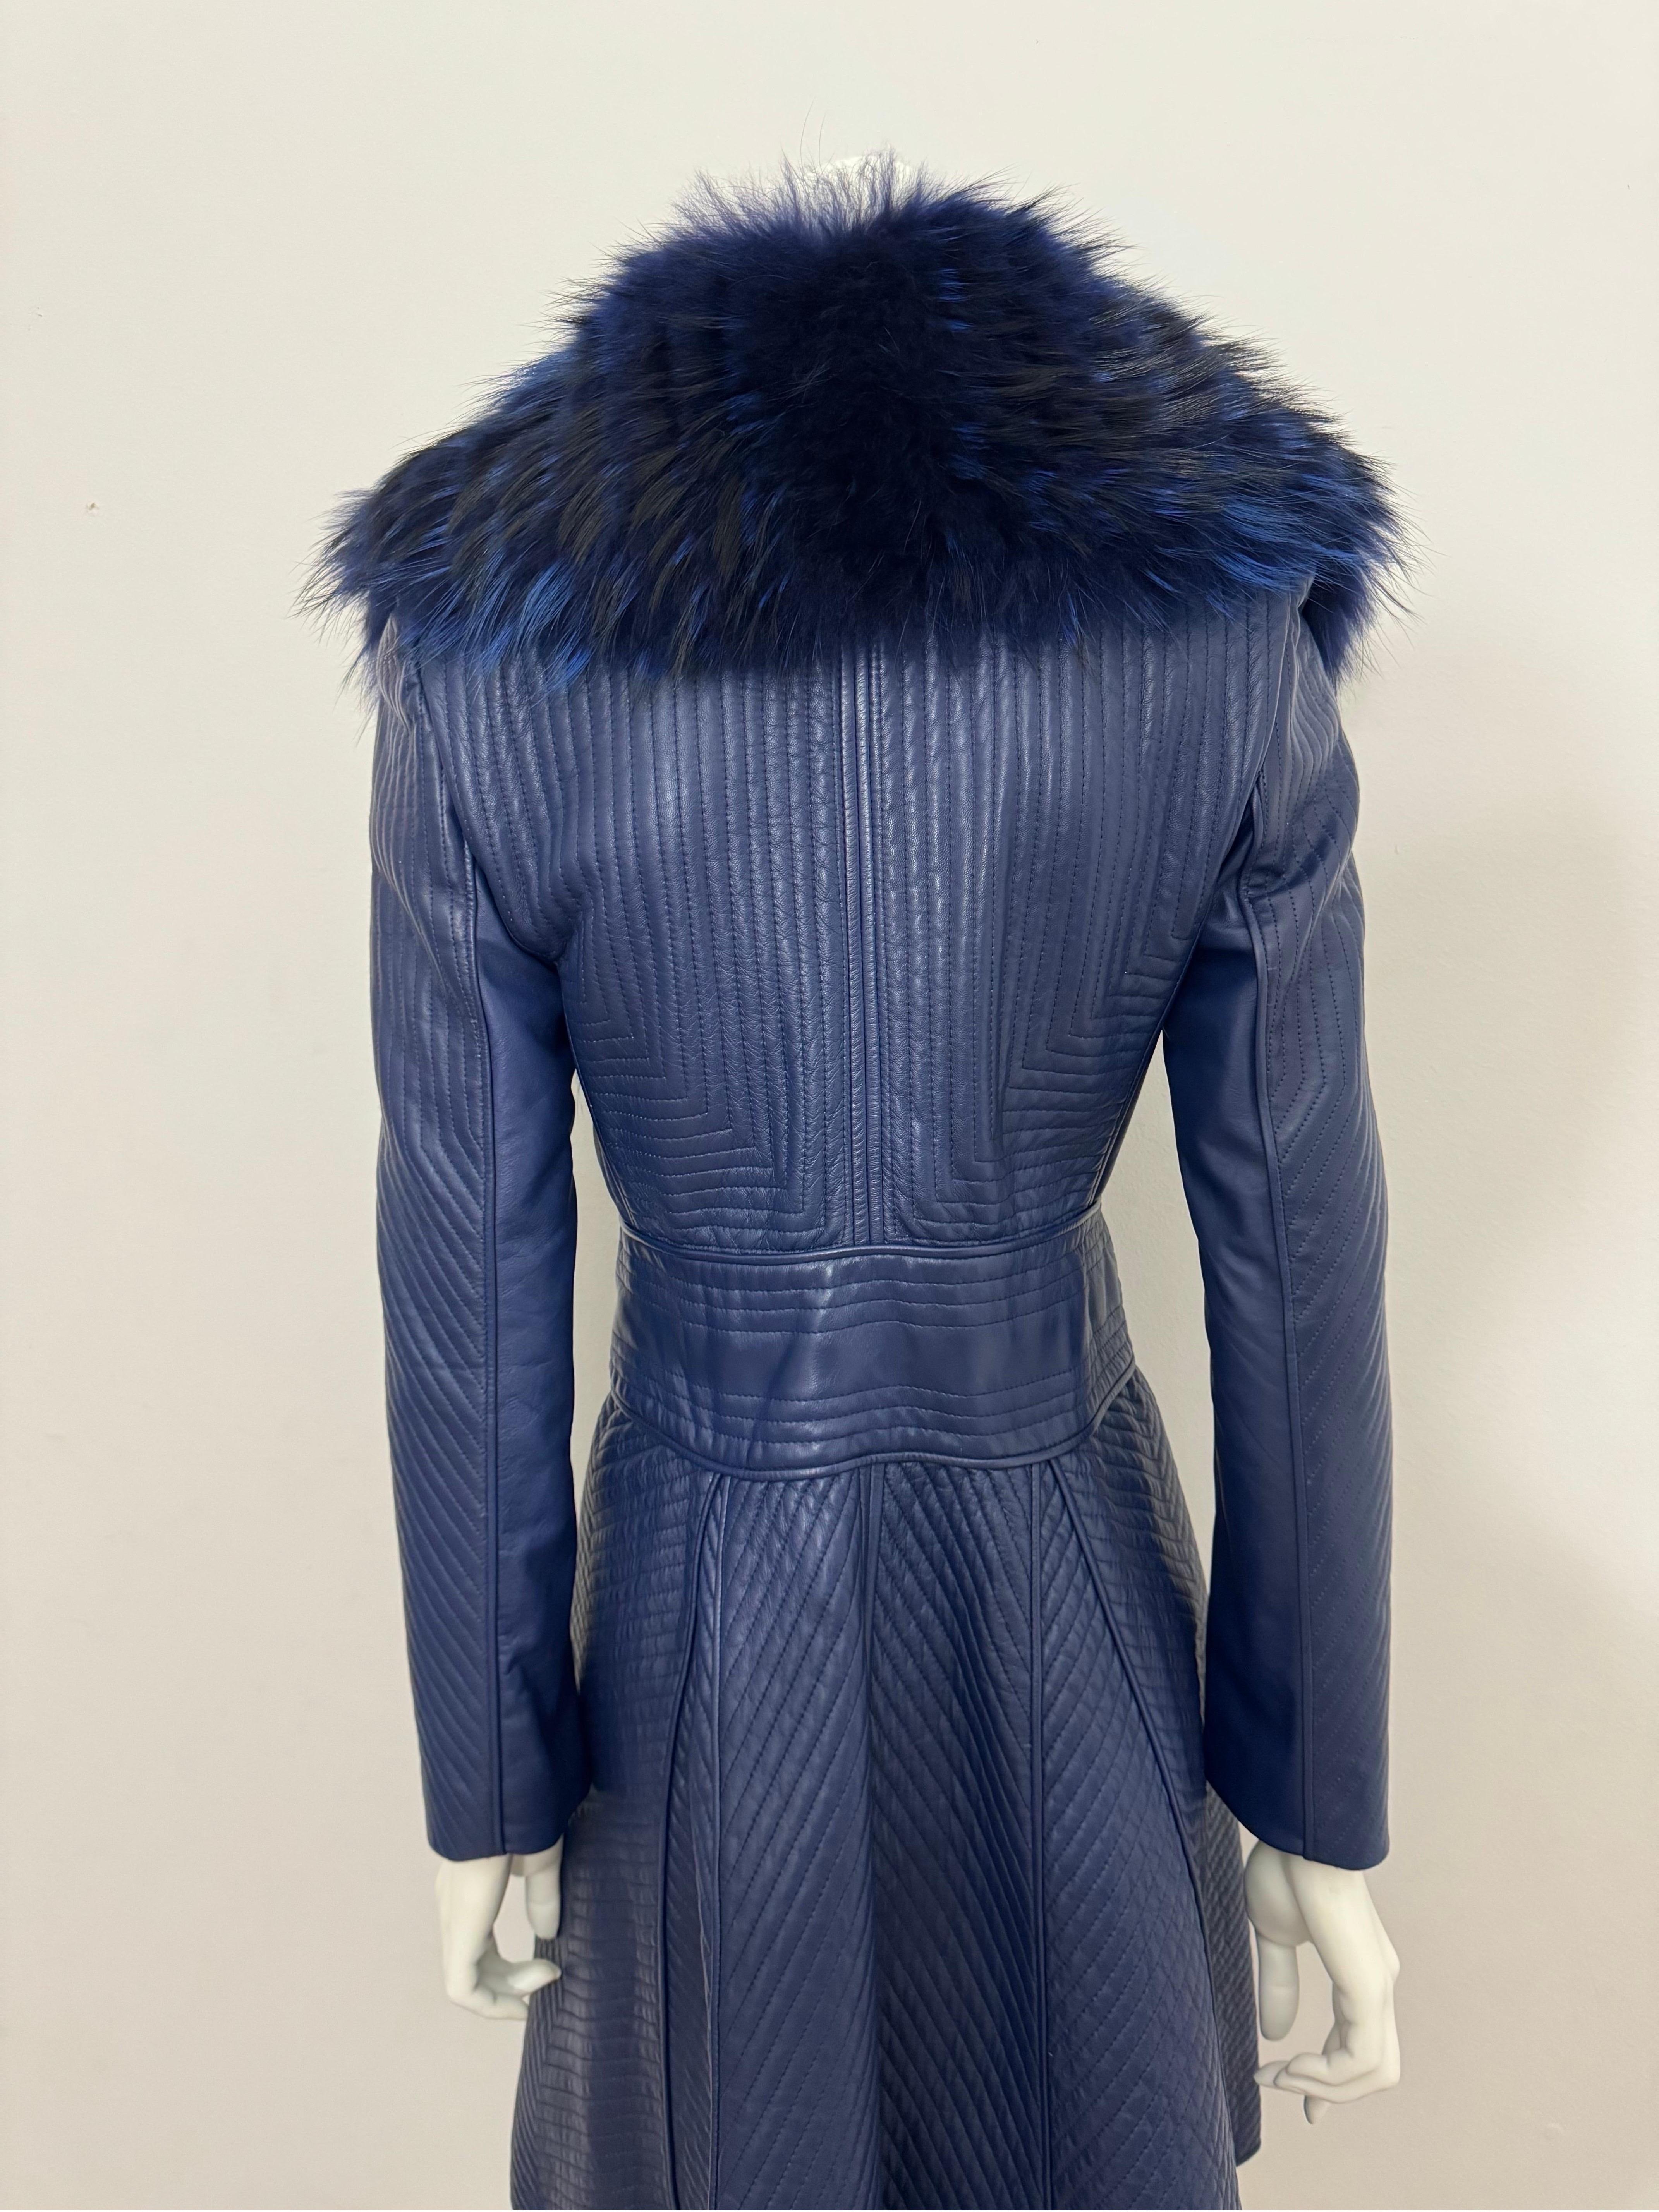 J Mendel Runway Pre Fall 2014 Fur Collar Blue Quilted Leather Coat Dress-Size 4 For Sale 1